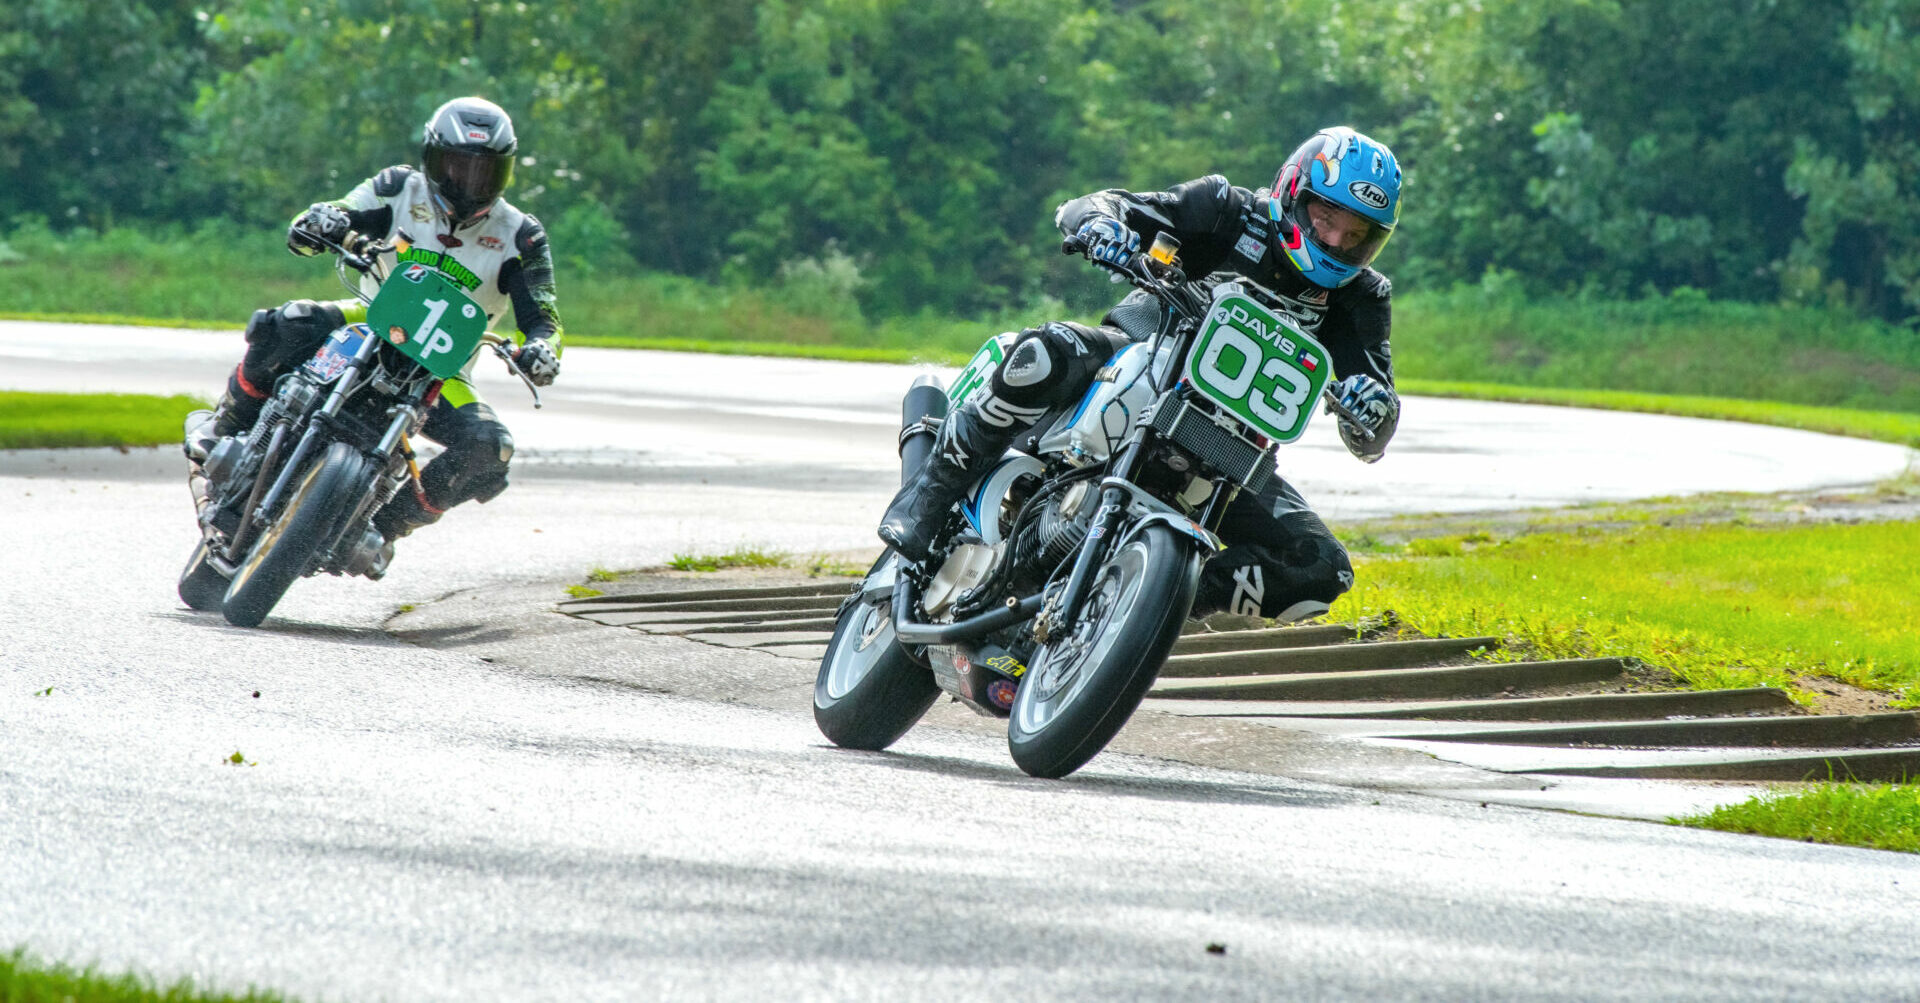 Jesse Davis (03) leads Jeremy Maddrill (1P) during AHRMA Vintage Cup Race One at Blackhawk Farms Raceway. Photo by Kevin McIntosh, courtesy AHRMA.